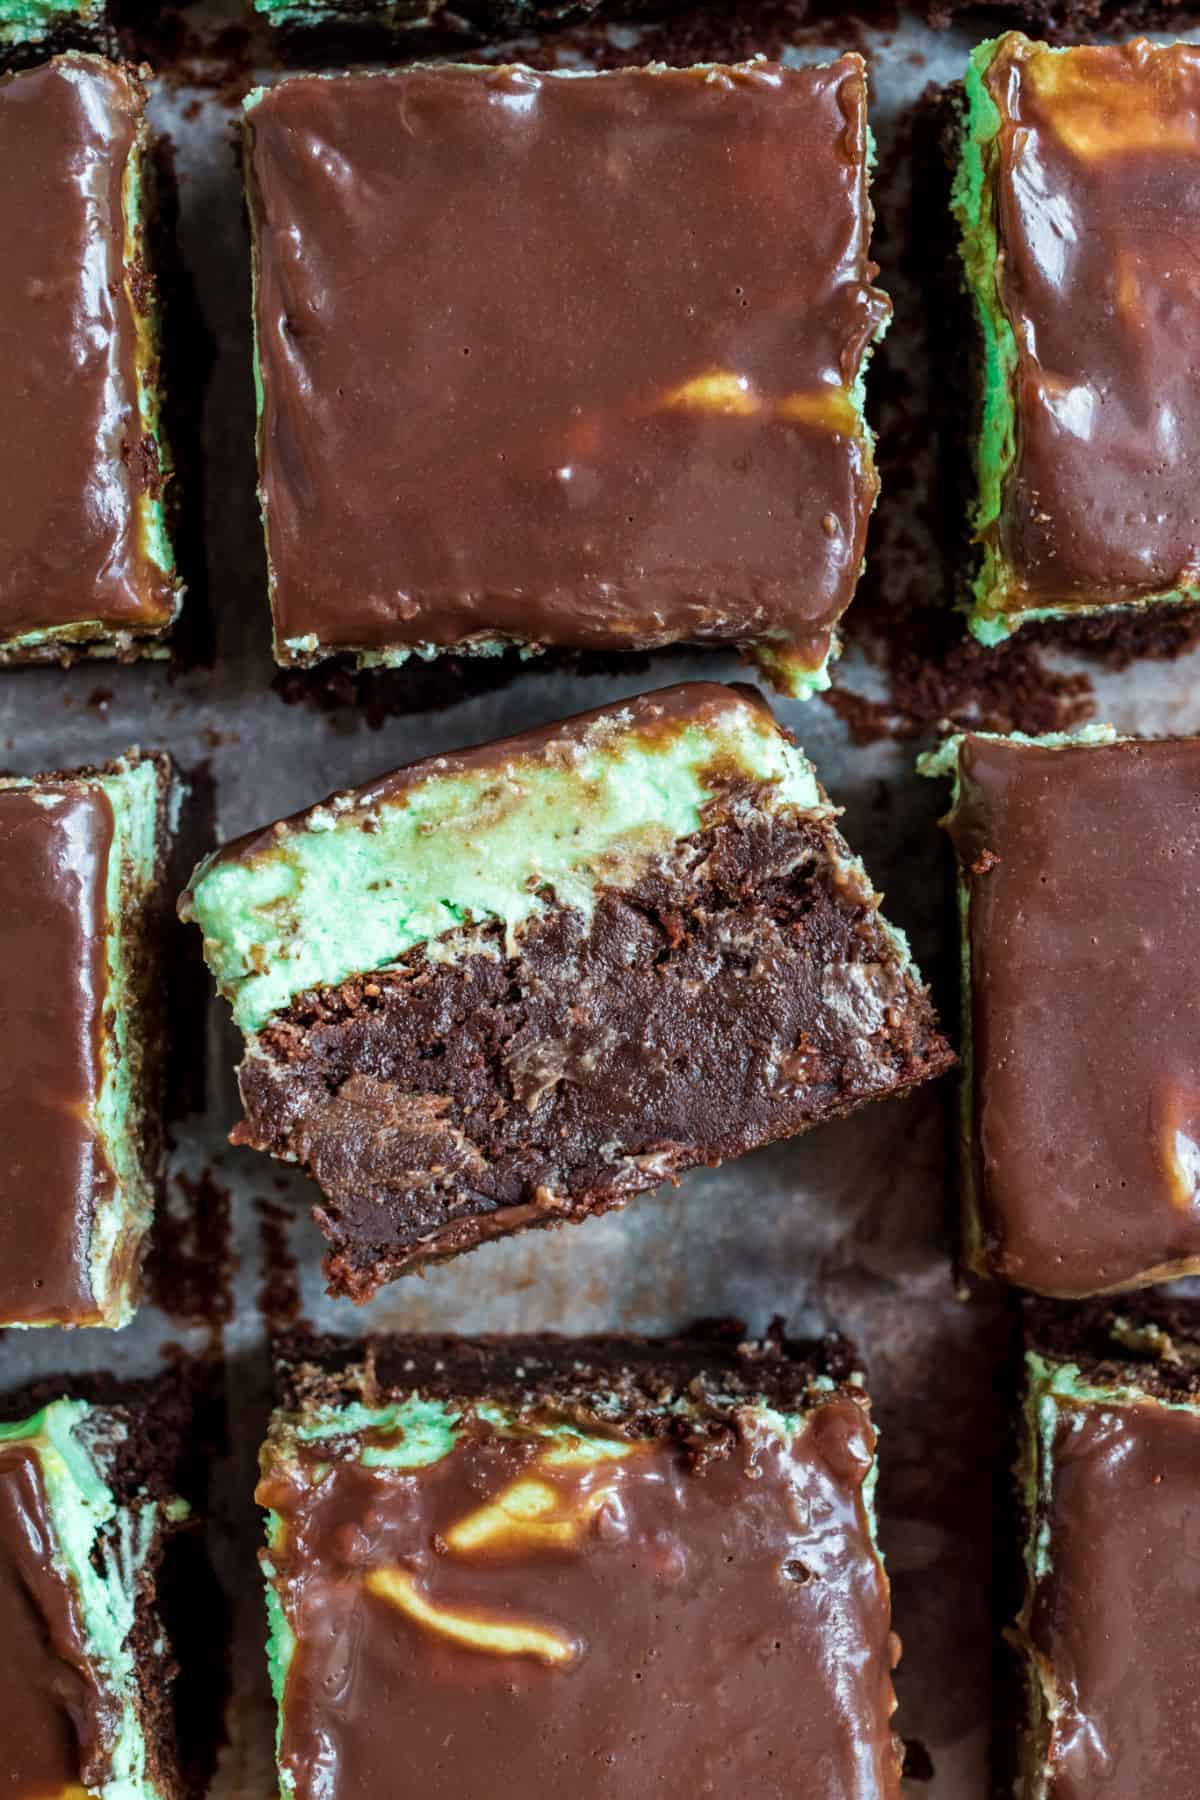 Chocolate brownies with mint filling and chocolate ganache on top.